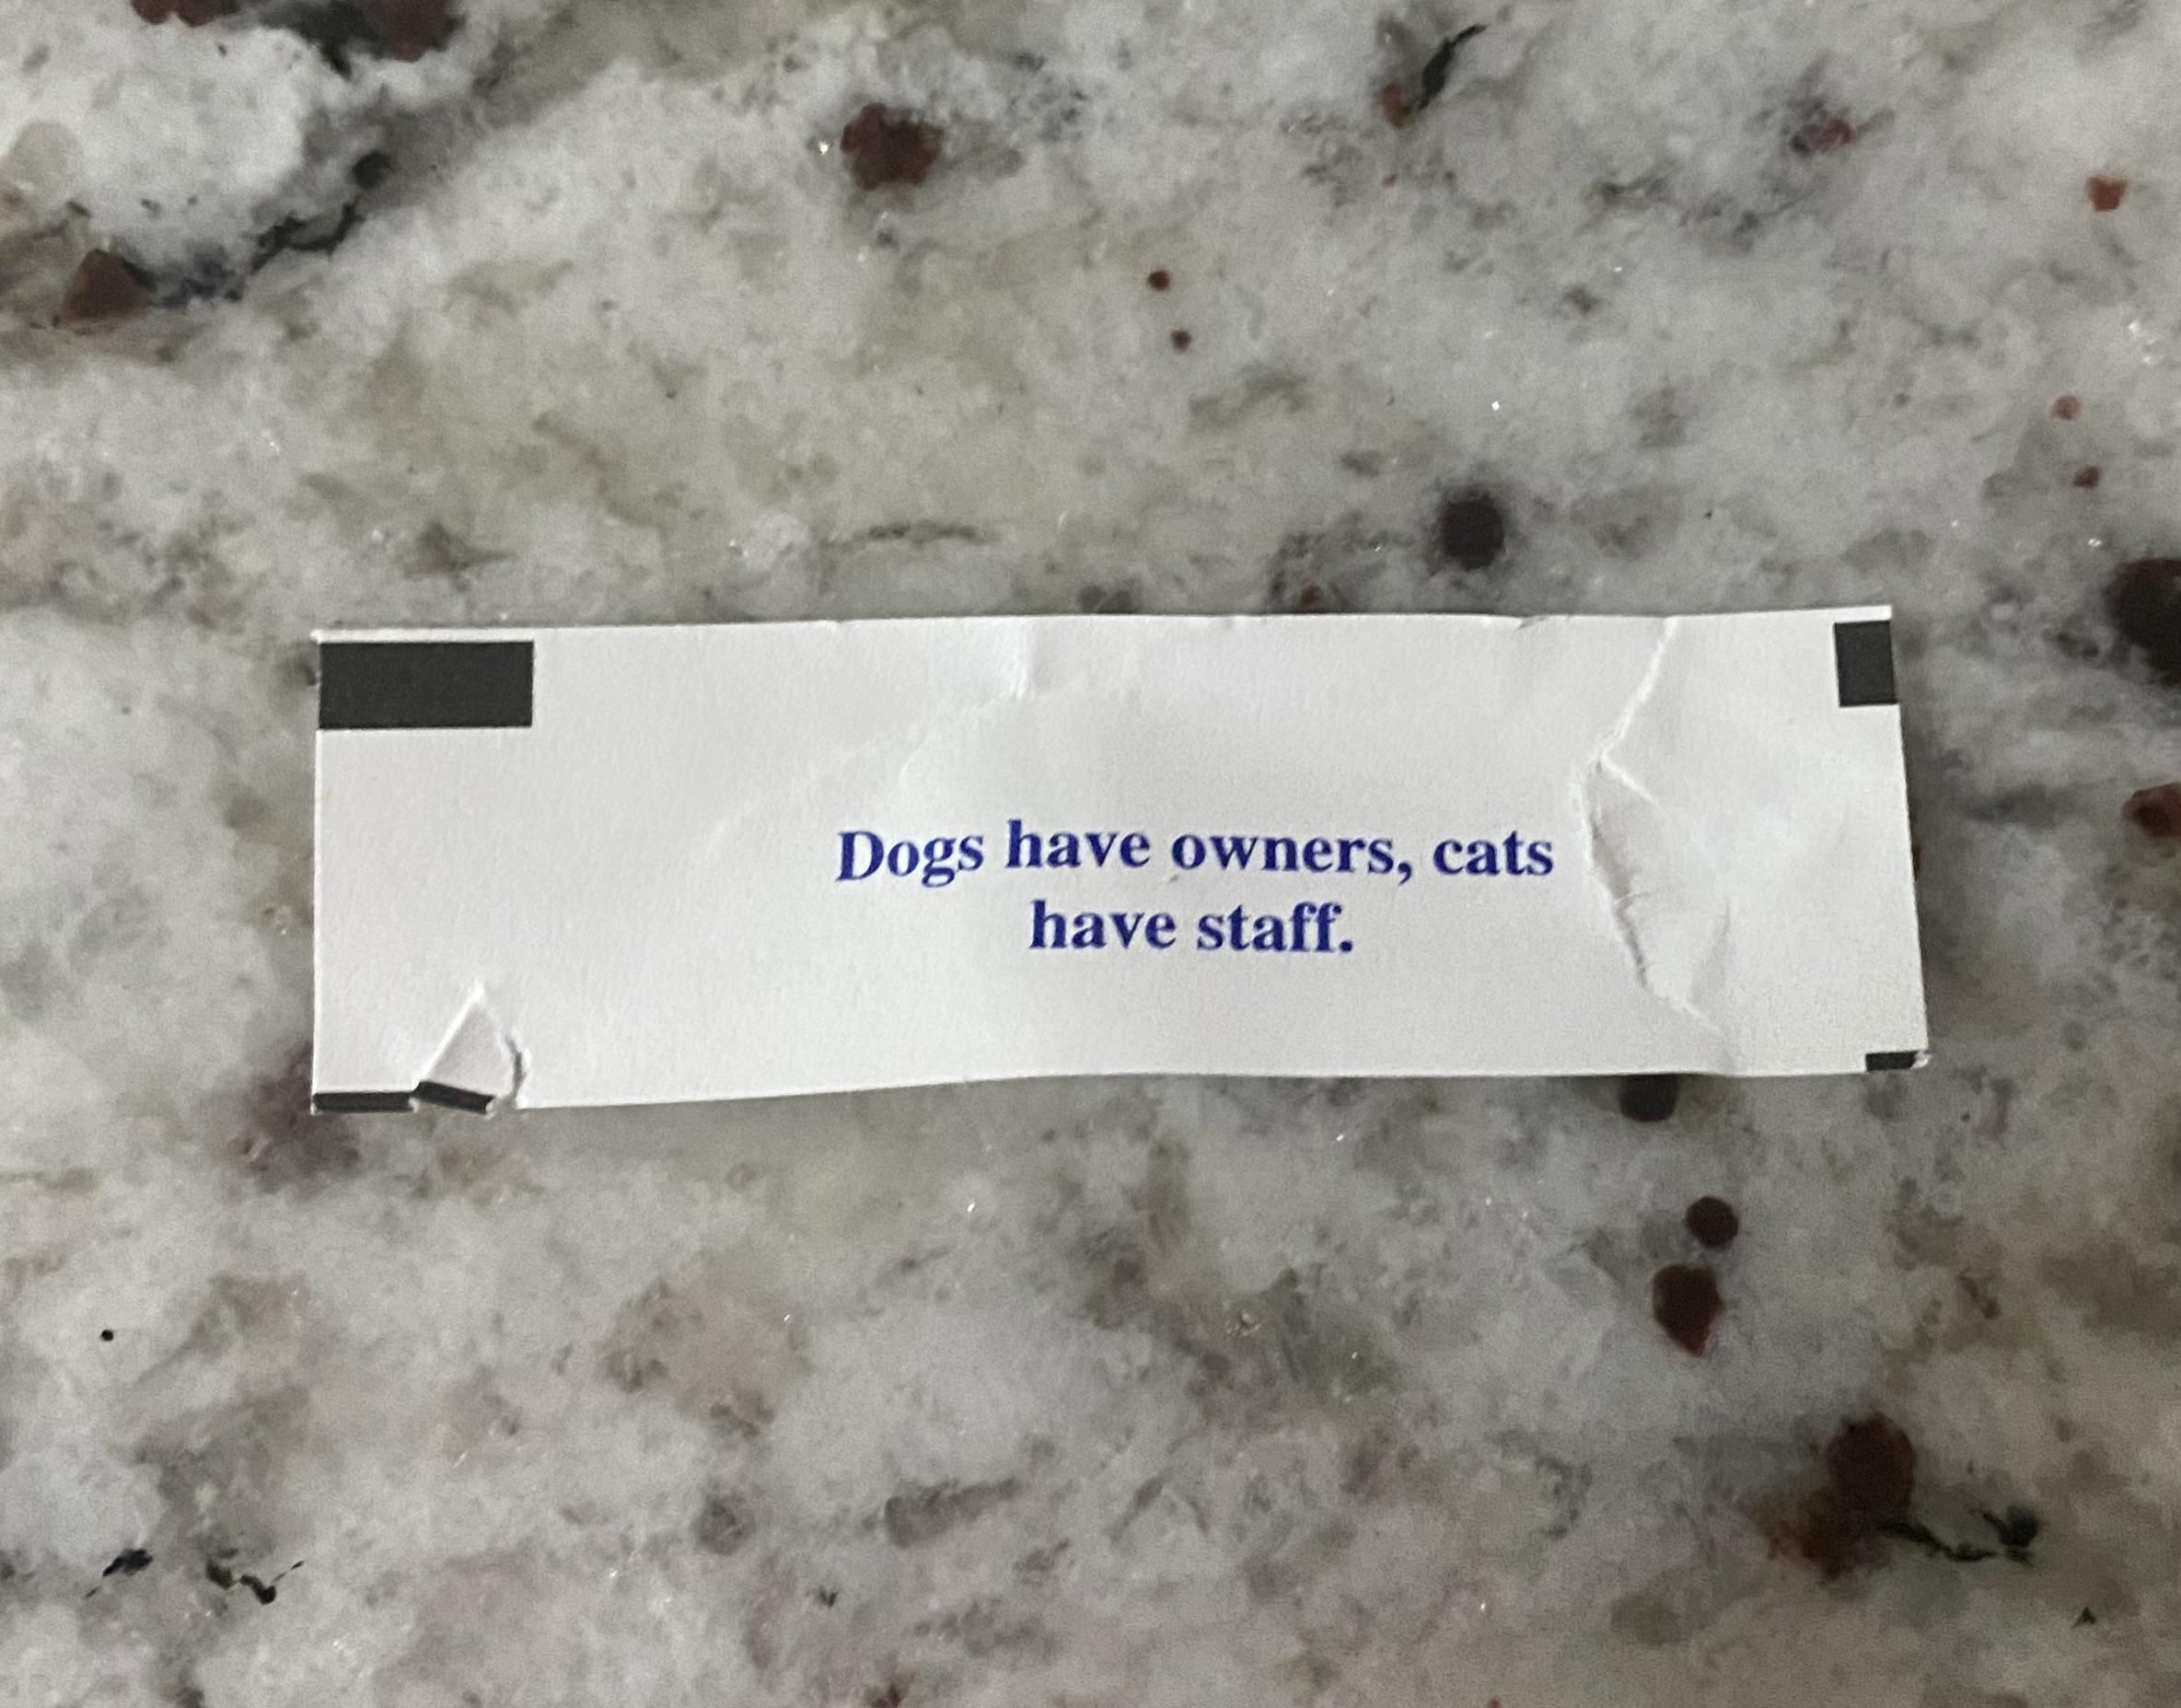 My wife’s fortune cookie fortune